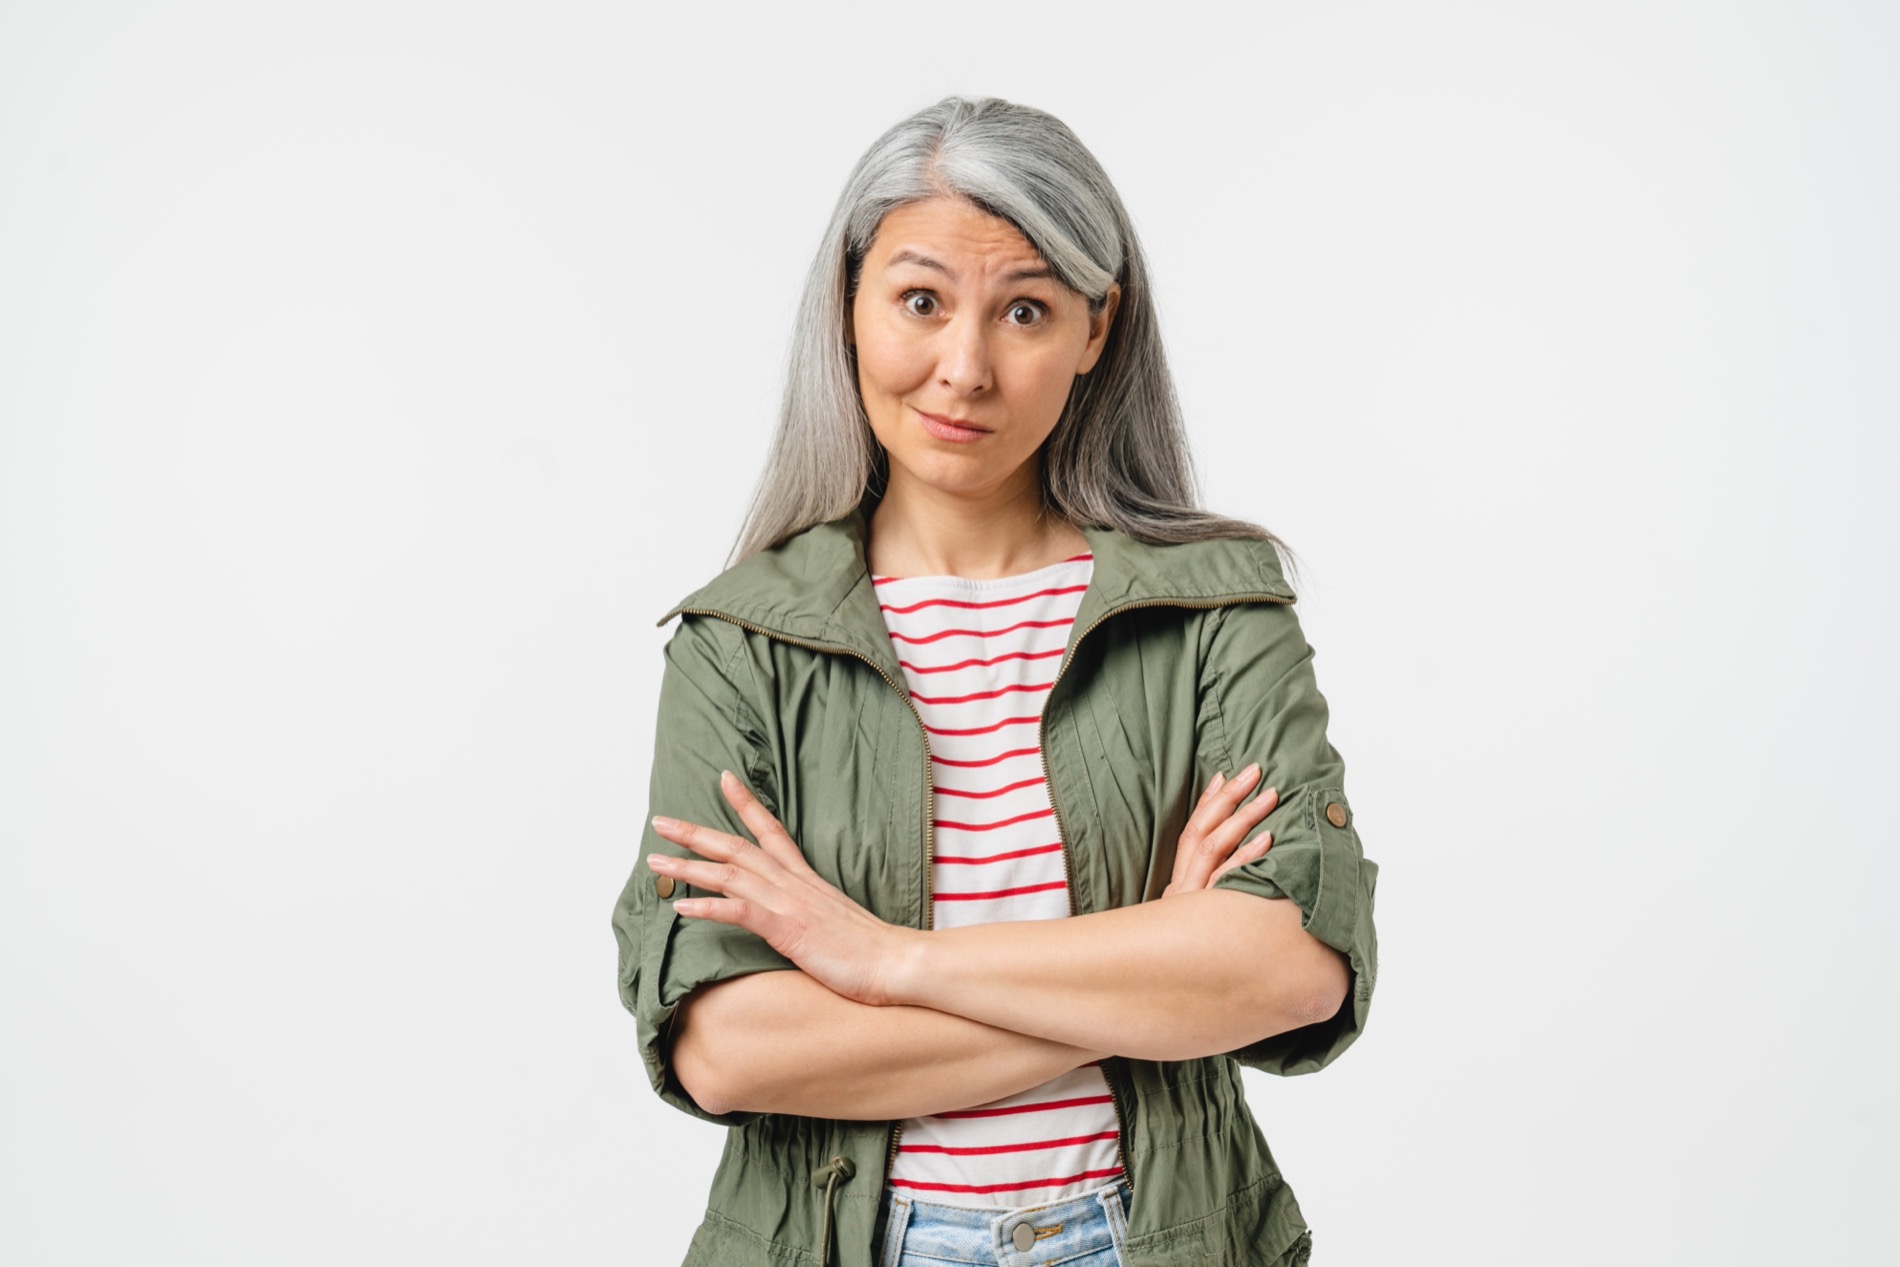 Exasperated Caucasian middle-aged woman in casual clothes is pursing her lips with arms crossed against a plain white background.